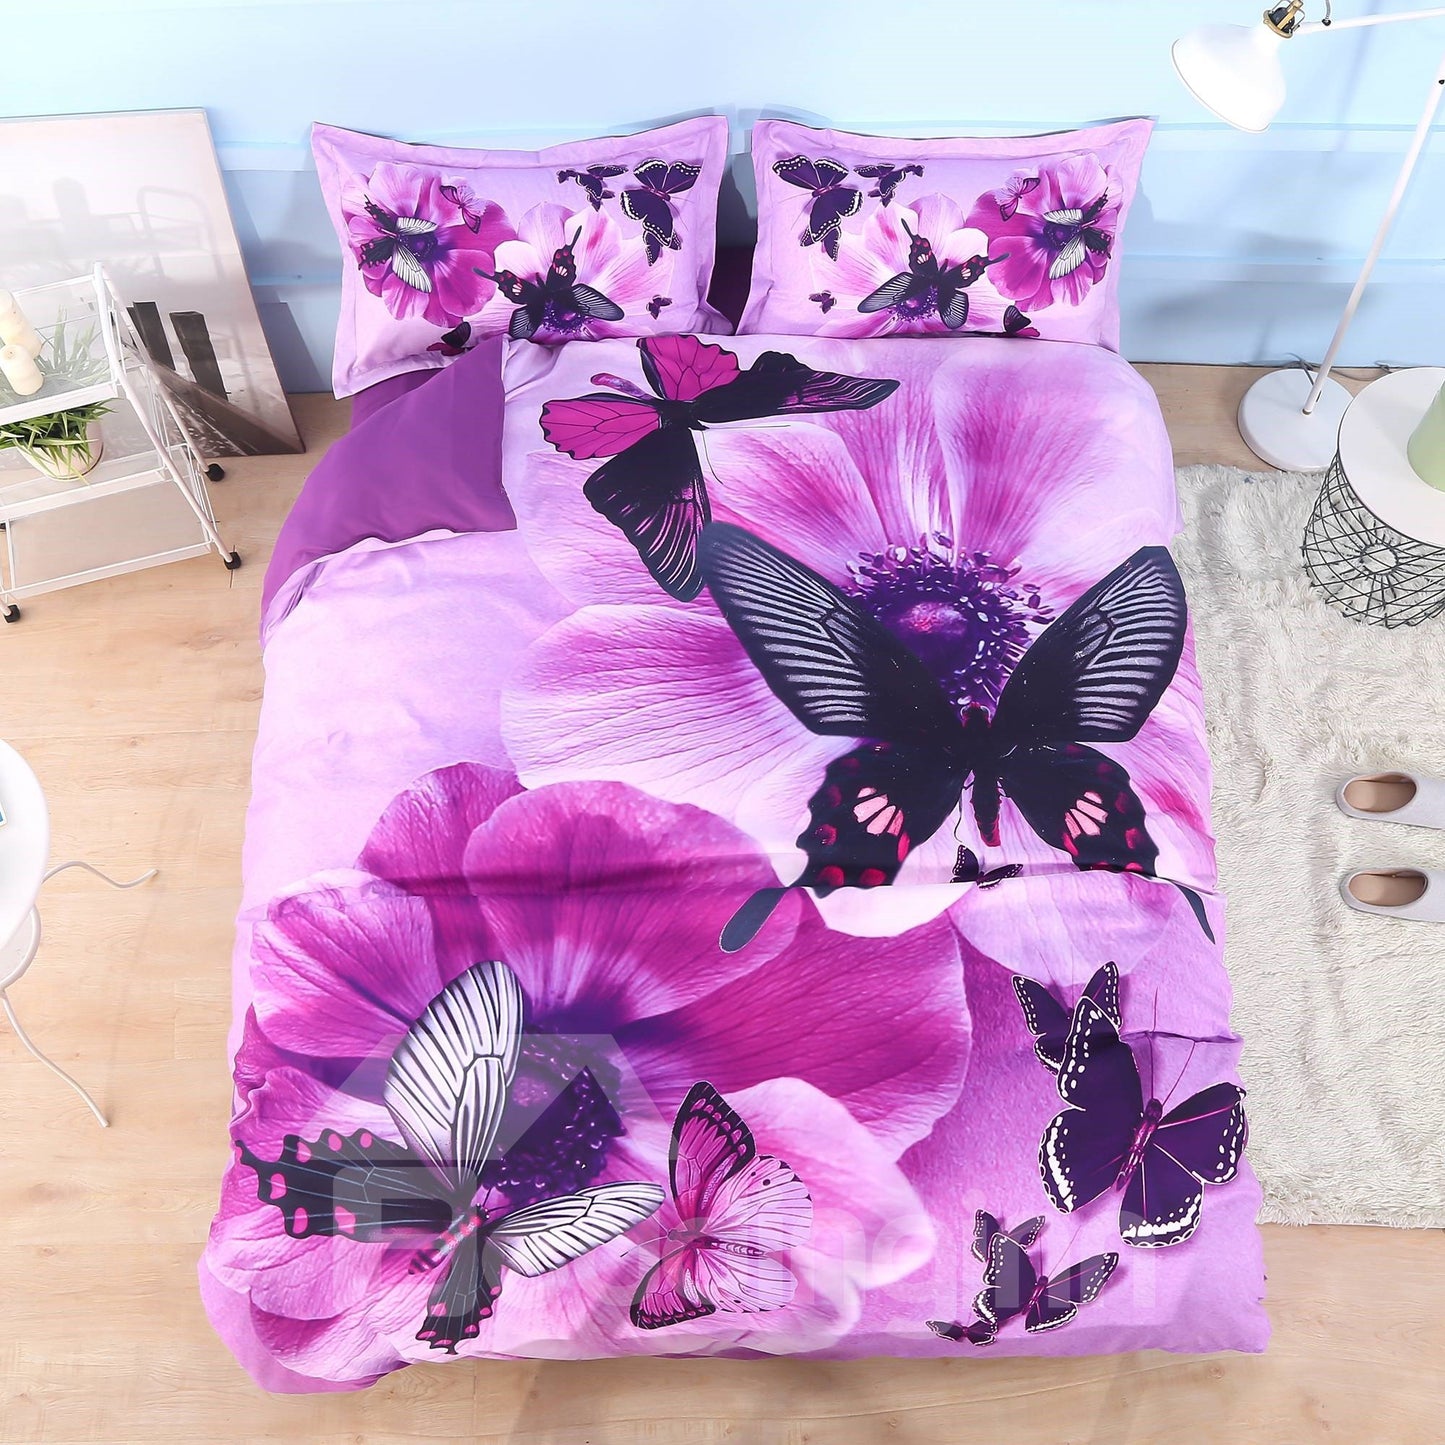 Pansy and Butterfly Printed 4-Piece 3D Floral Bedding Set/Duvet Cover Set Purple Microfiber